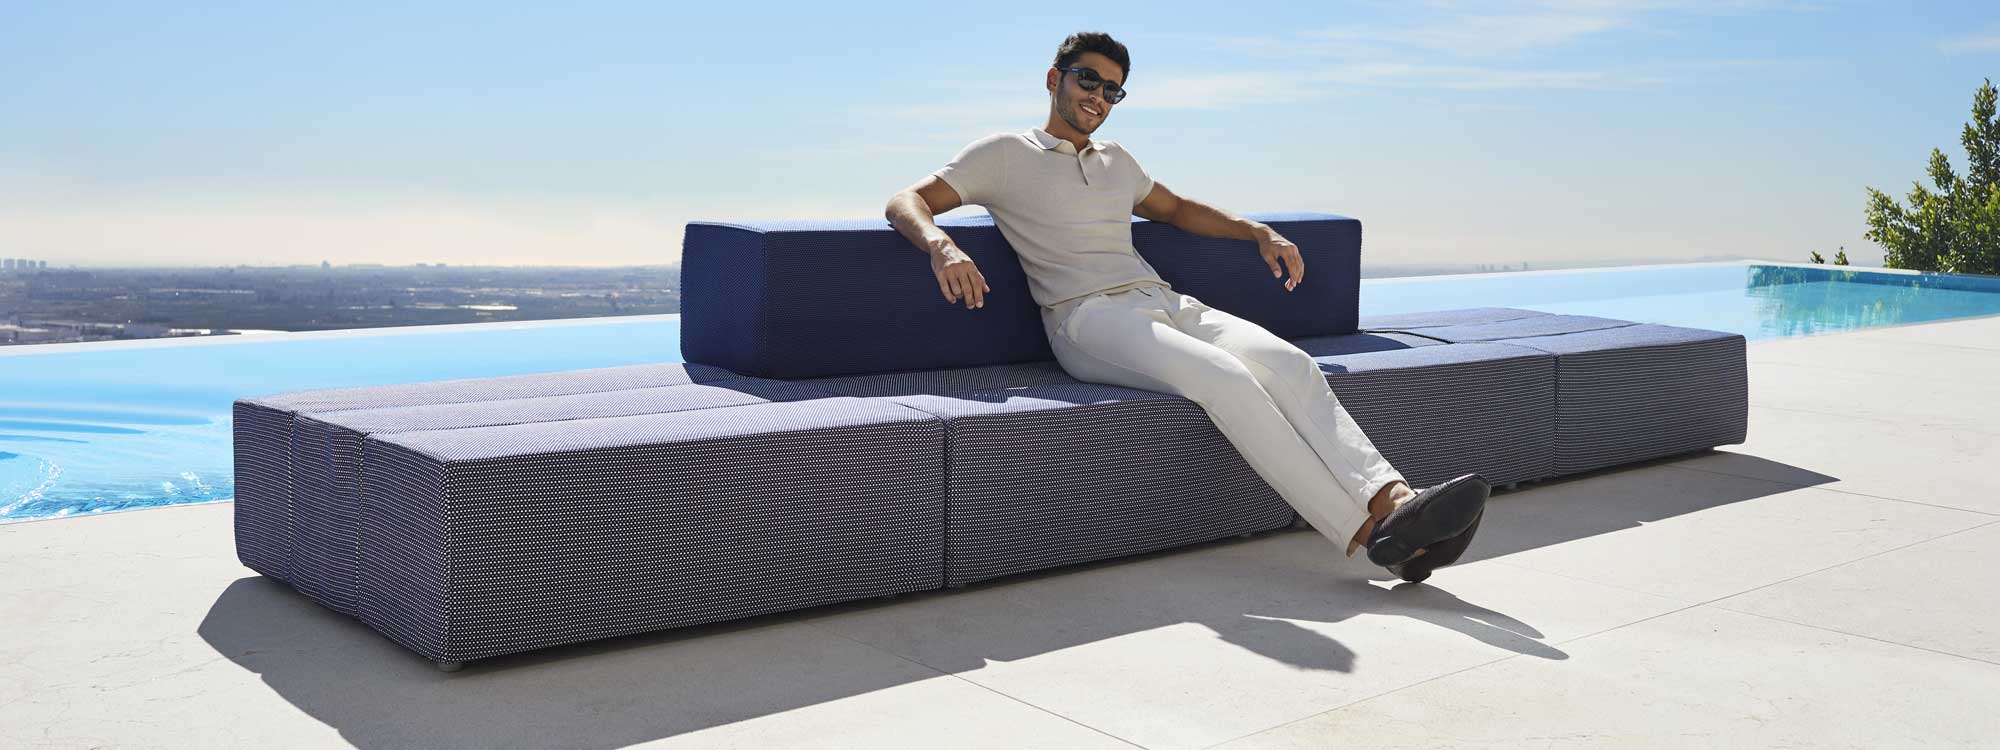 Image of young dude with sunglasses sat on Vondom Tablet blue garden sofa, with horizon swimming pool and blue sky in the background